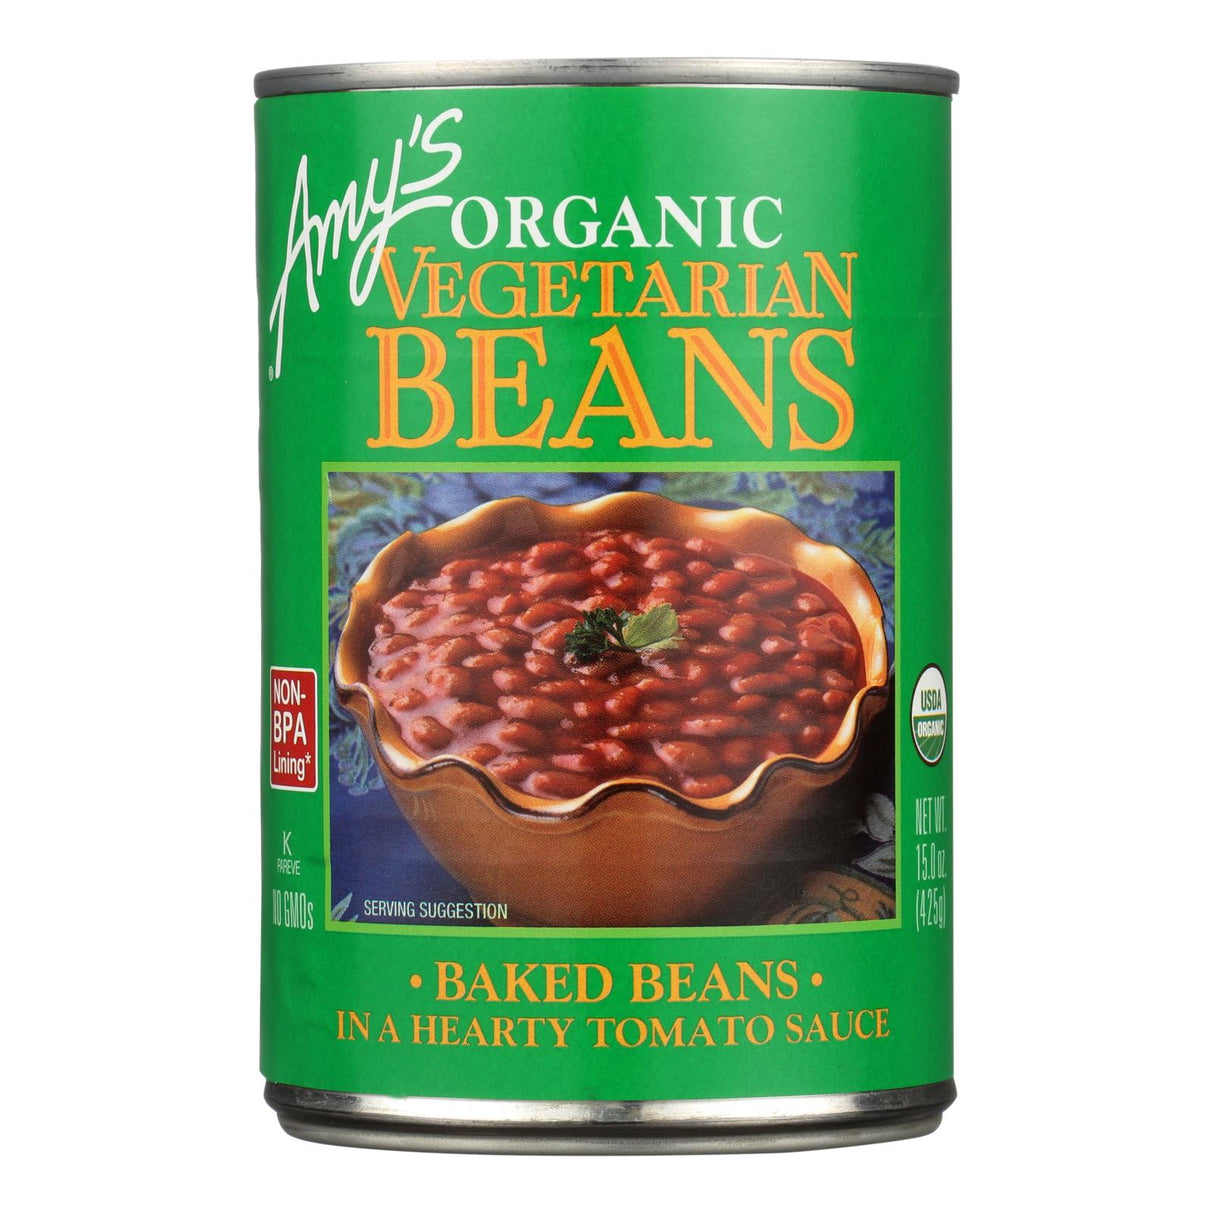 Amy's Organic Vegetarian Baked Beans, 15 Oz. Pack of 12 - Cozy Farm 